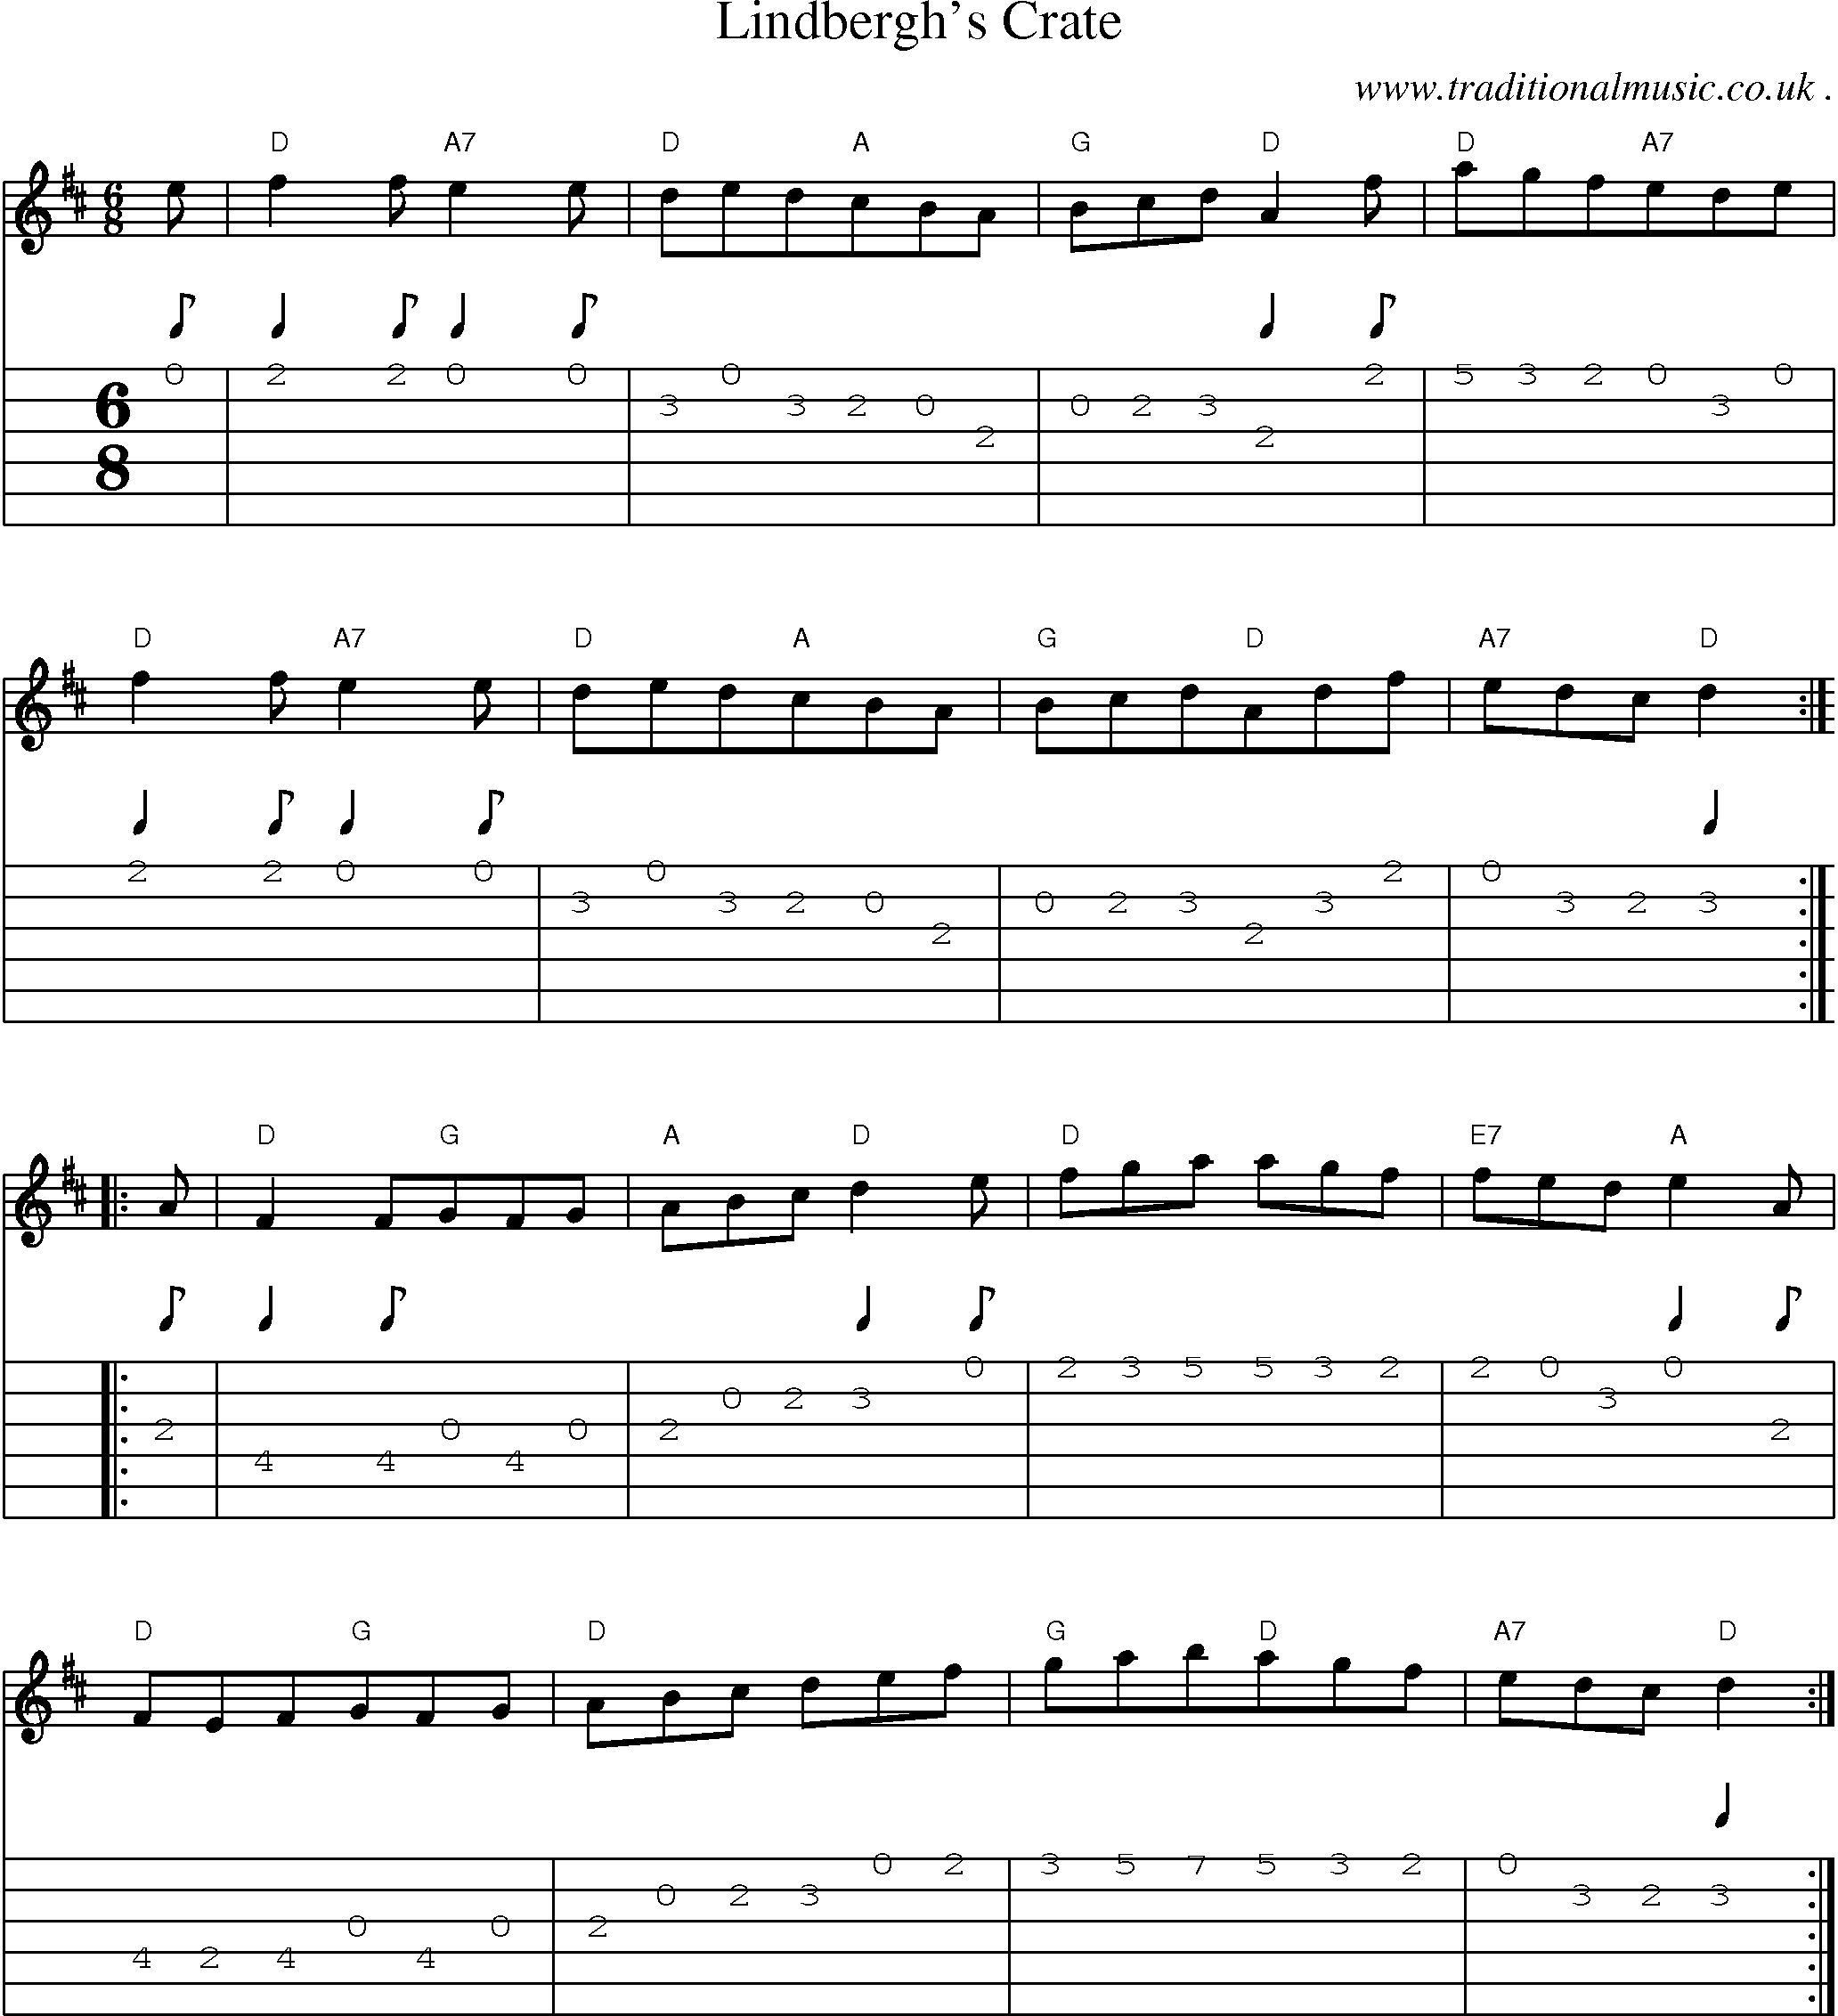 Sheet-Music and Guitar Tabs for Lindberghs Crate